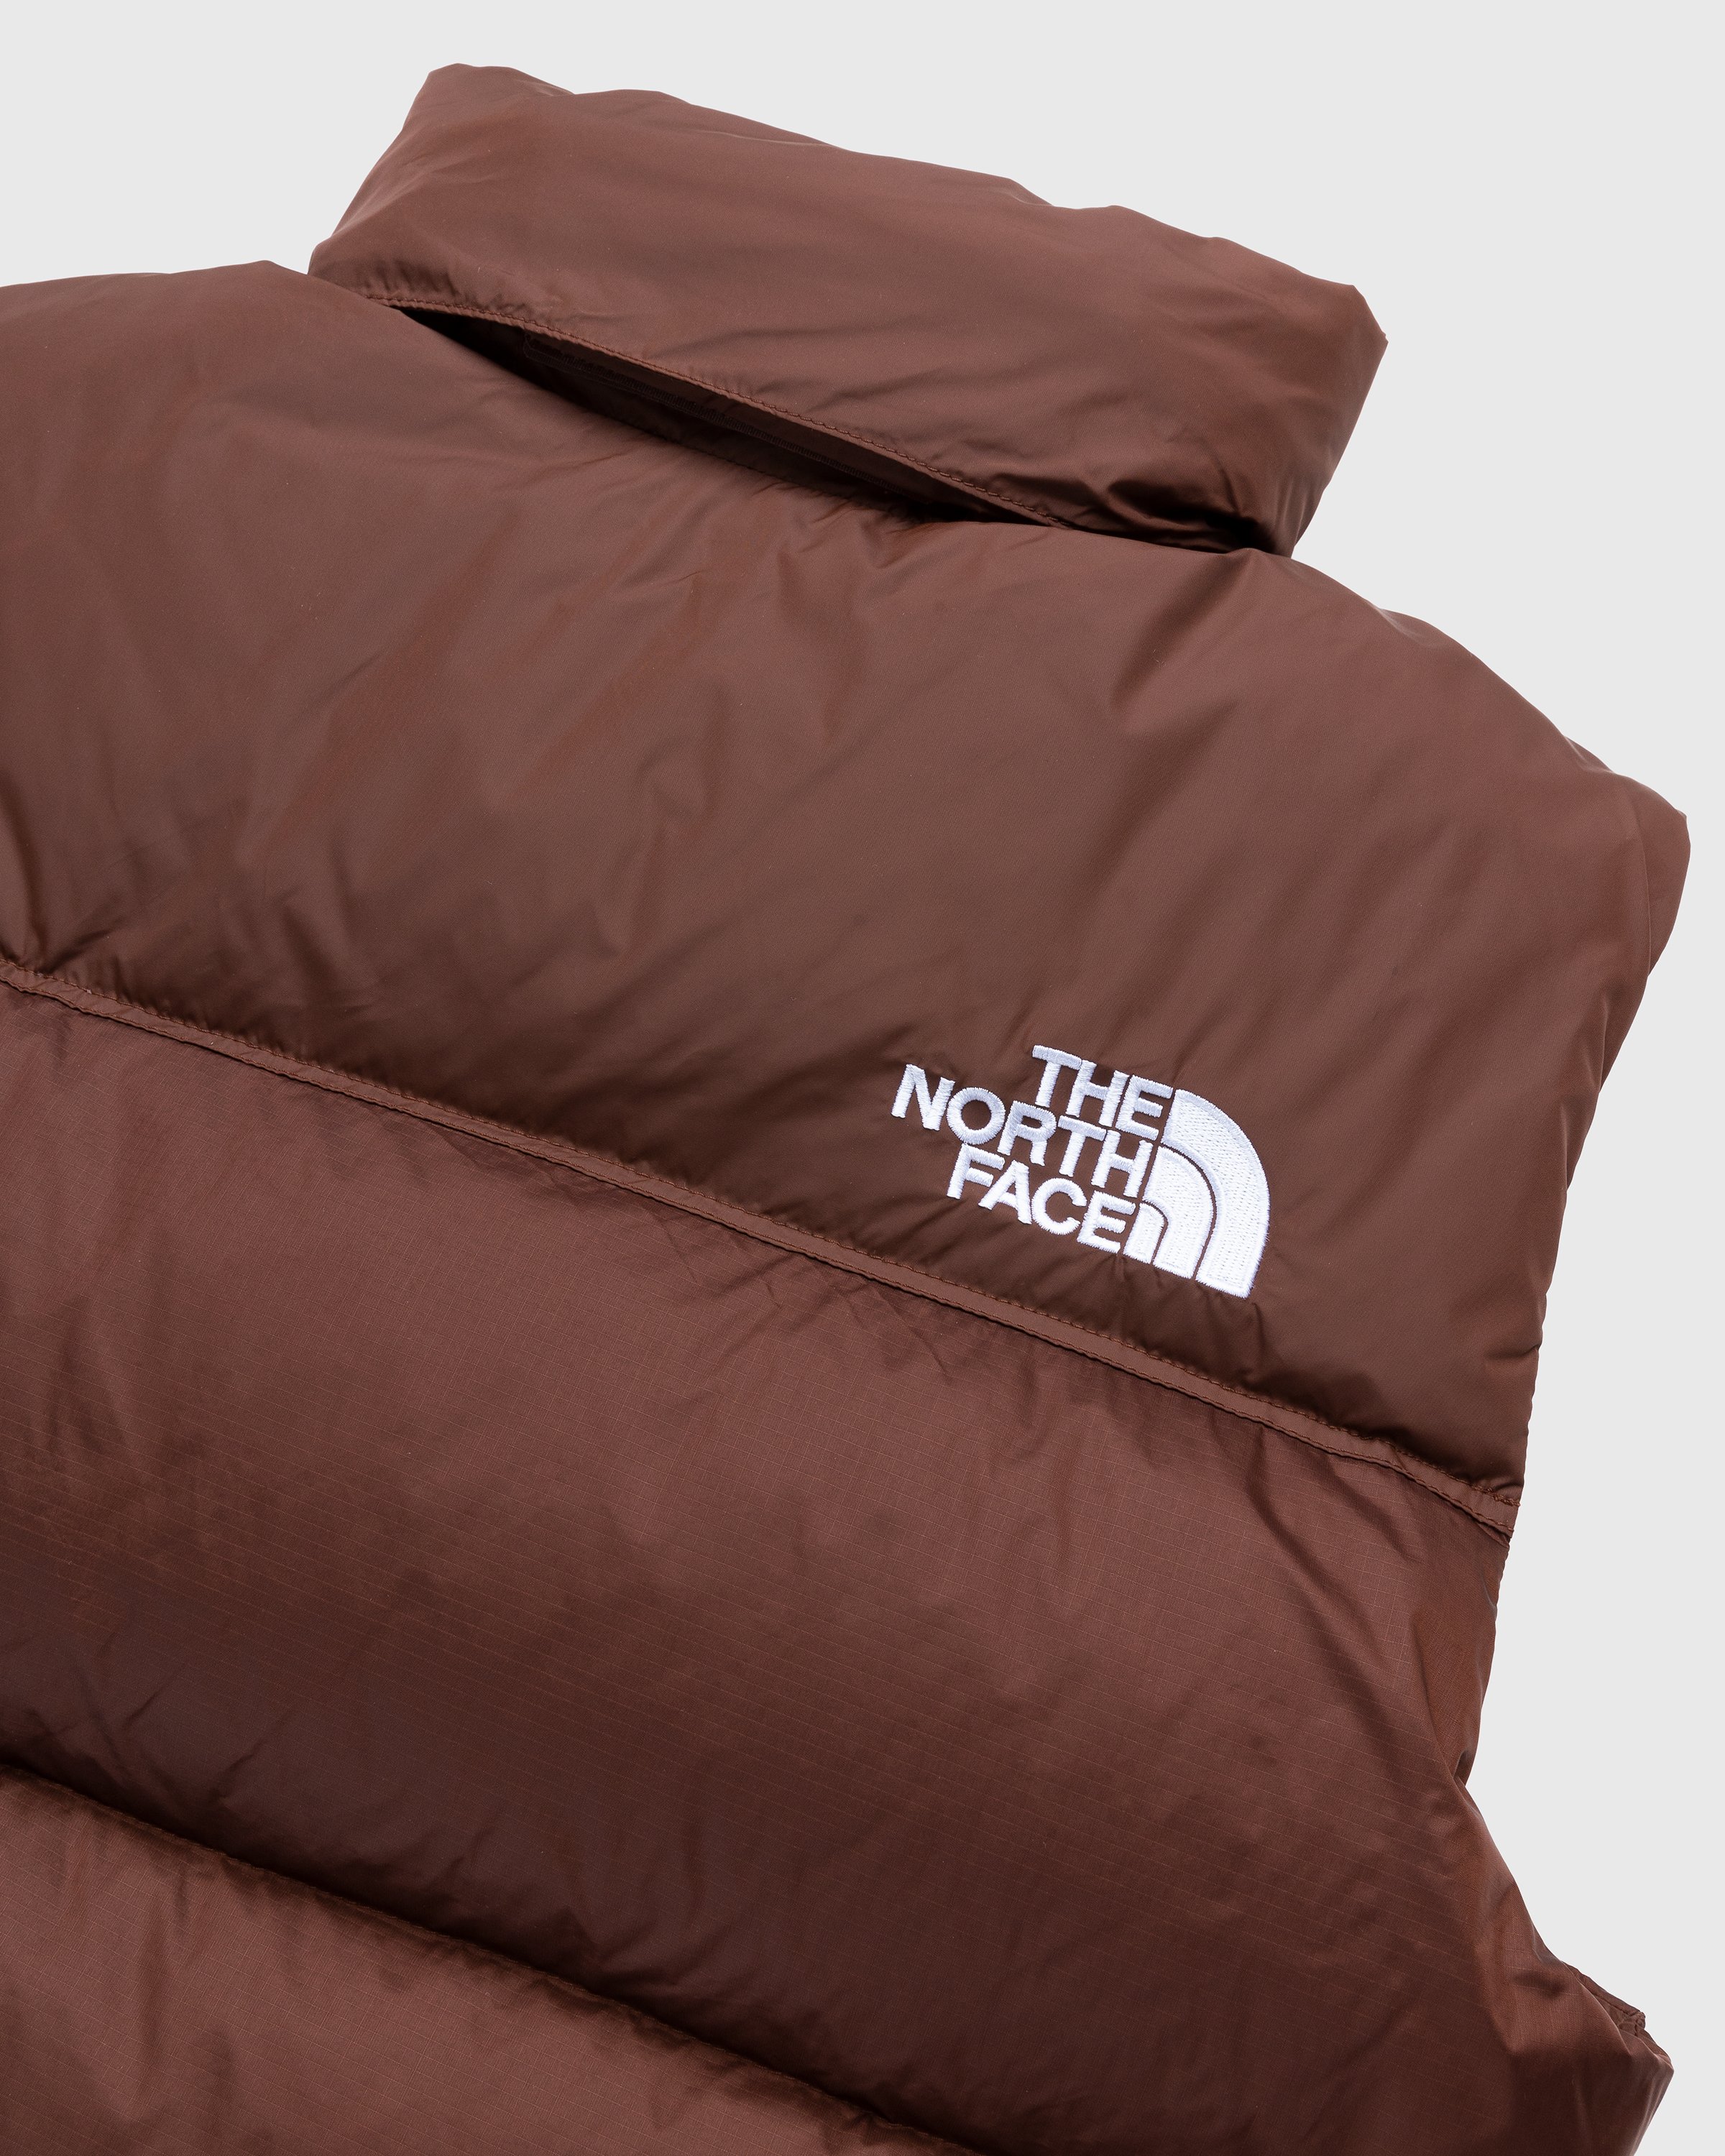 The North Face - Insulated Himalayan Vest Dark Oak - Clothing - Beige - Image 4